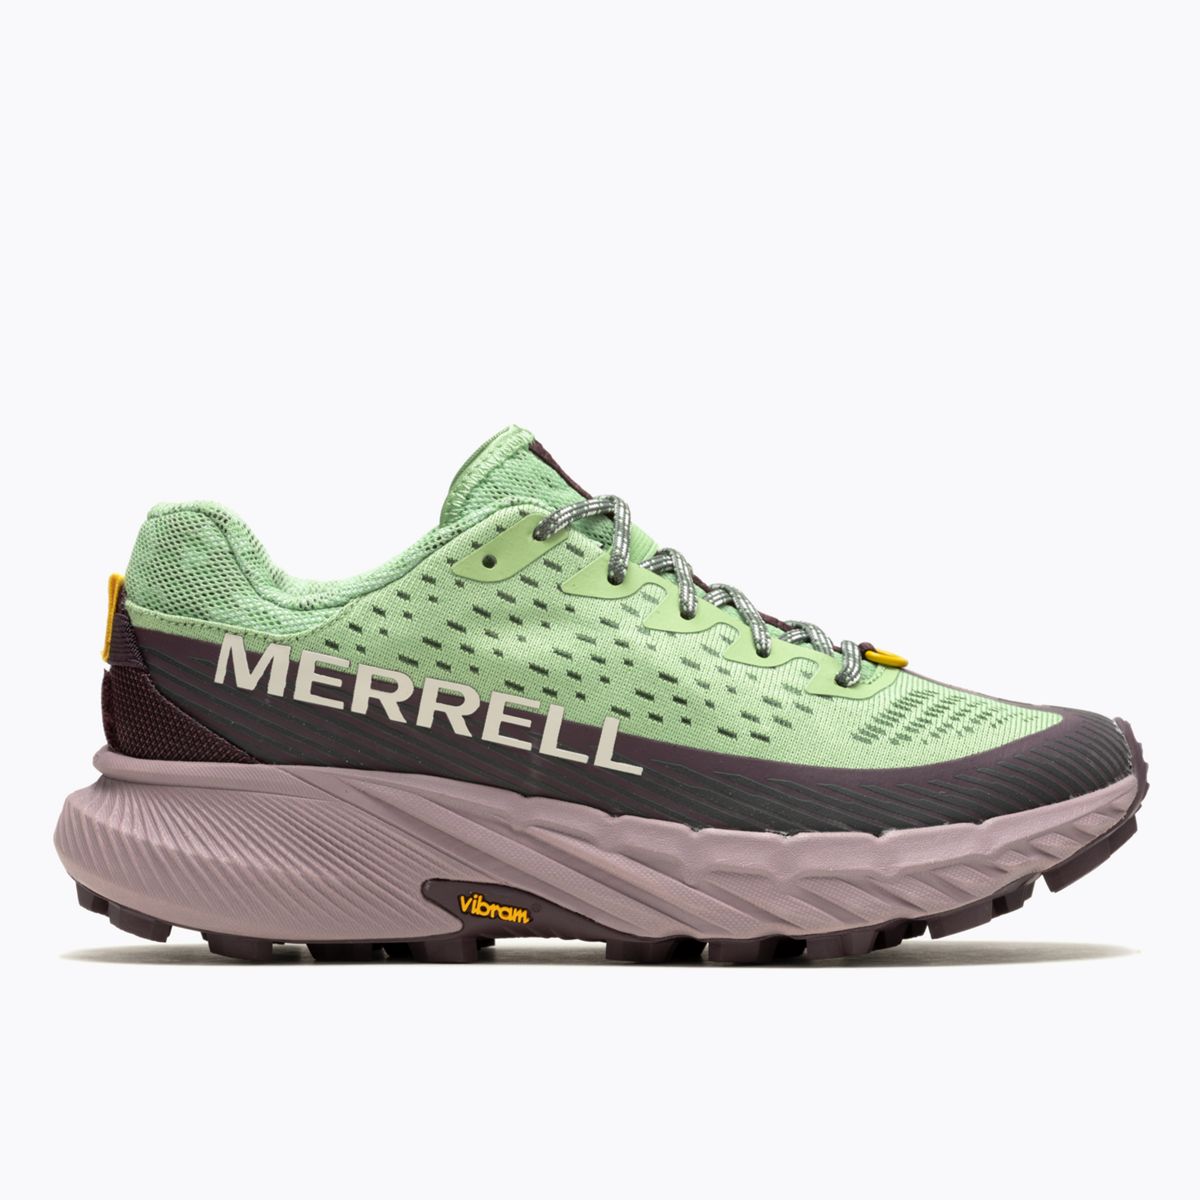 Welkom Email Vrijwel Merrell Official: Top Rated Hiking Footwear & Outdoor Gear